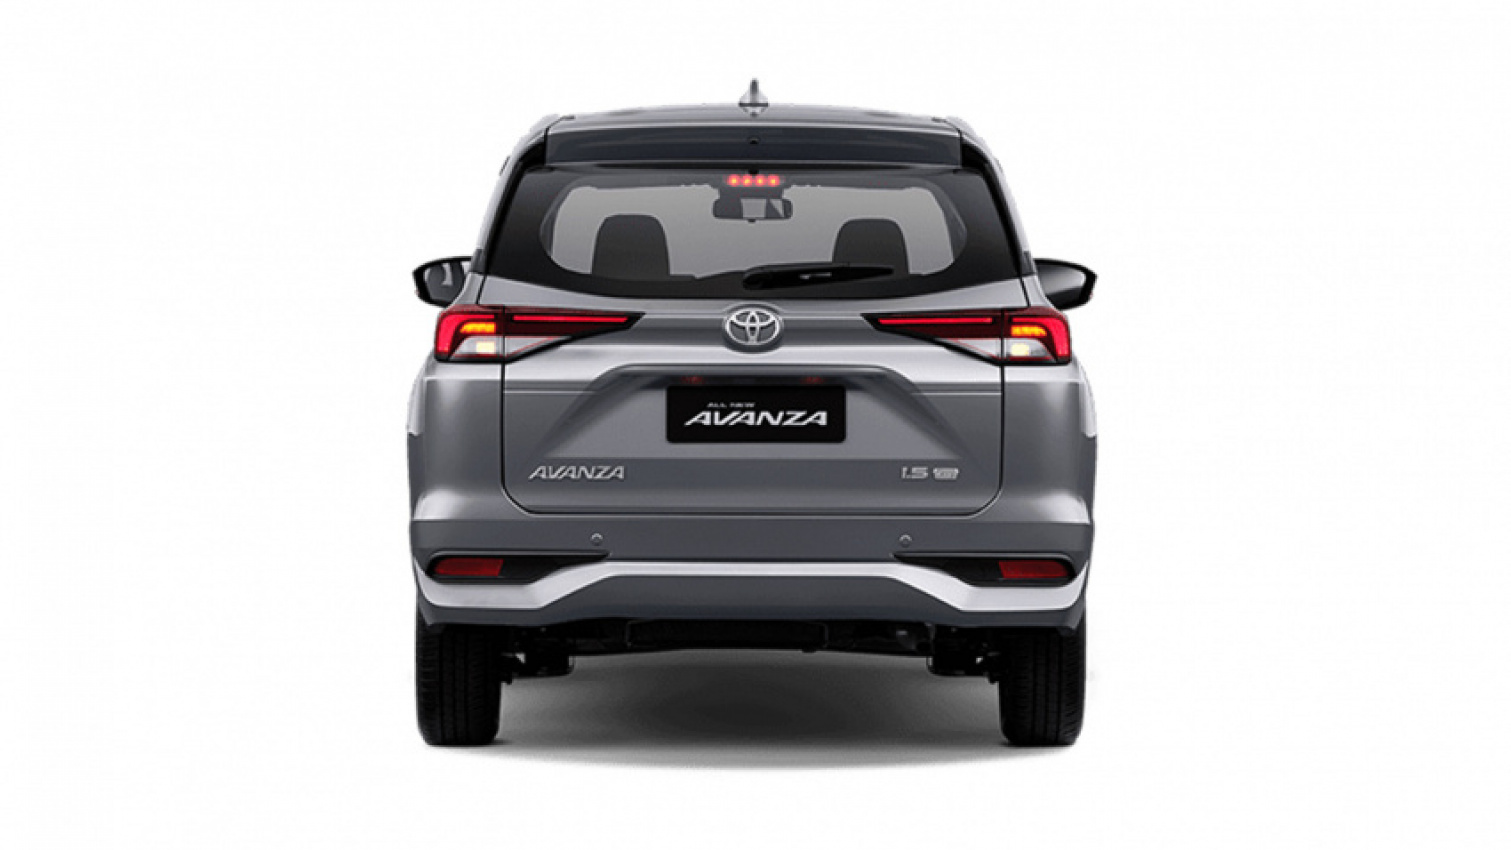 auto news, autos, cars, toyota, android, avanza, daihatsu xenia, toyota avanza, toyota avanza 2022, toyota avanza 2023, toyota avanza mpv, toyota rush, android, ph specs, features, prices: 2022 toyota avanza